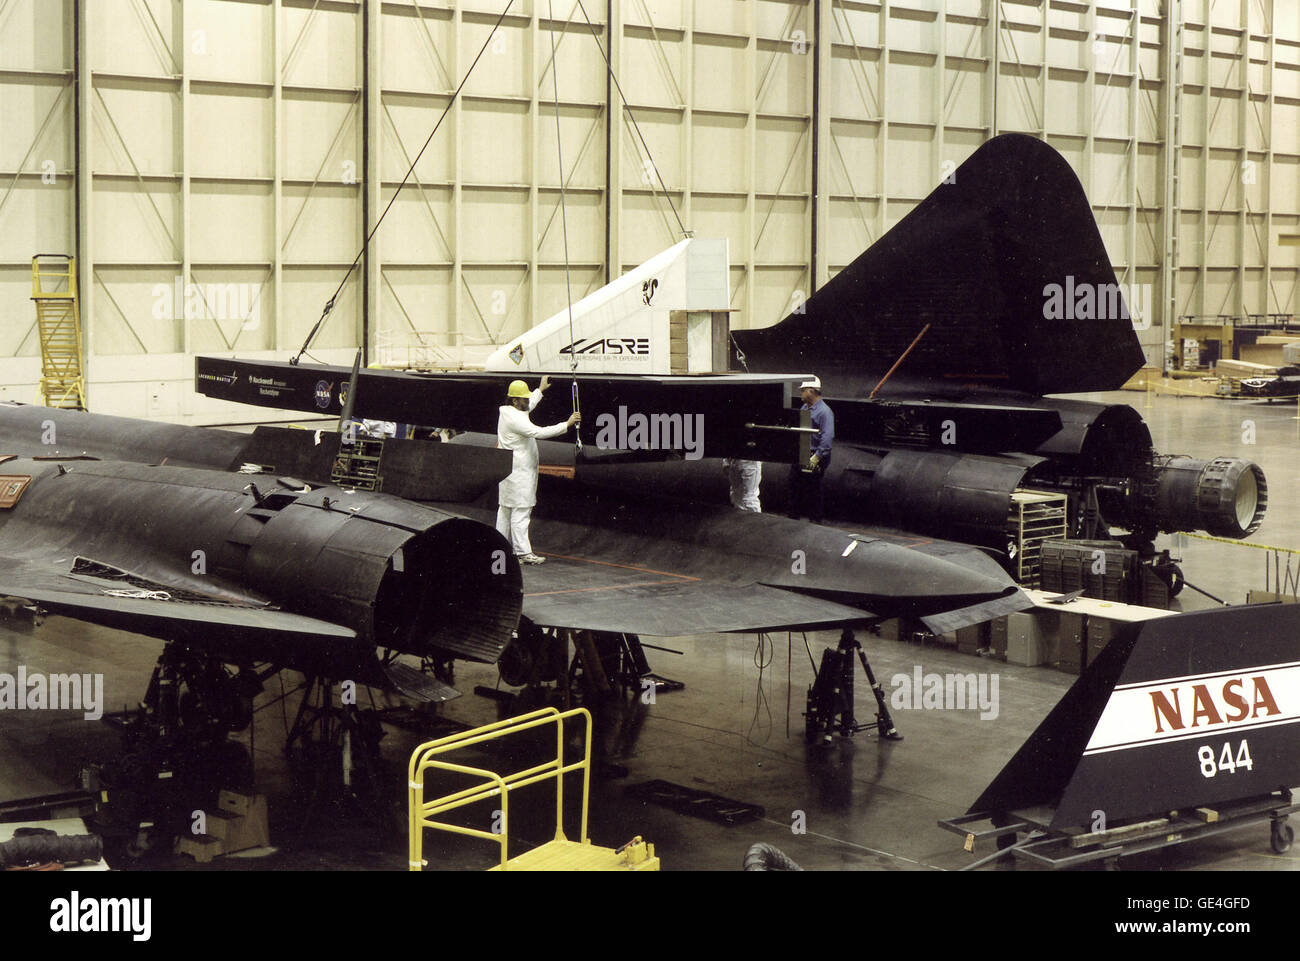 This is a rear/side view of the Linear Aerospike SR Experiment (LASRE) pod on NASA SR-71, tail number 844. This photo was taken during the fit-check of the pod on February 15, 1996, at Lockheed Martin Skunkworks in Palmdale, California. The LASRE experiment was designed to provide in-flight data to help Lockheed Martin evaluate the aerodynamic characteristics and the handling of the SR-71 linear aerospike experiment configuration. The goal of the project was to provide in-flight data to help Lockheed Martin validate the computational predictive tools it was using to determine the aerodynamic p Stock Photo